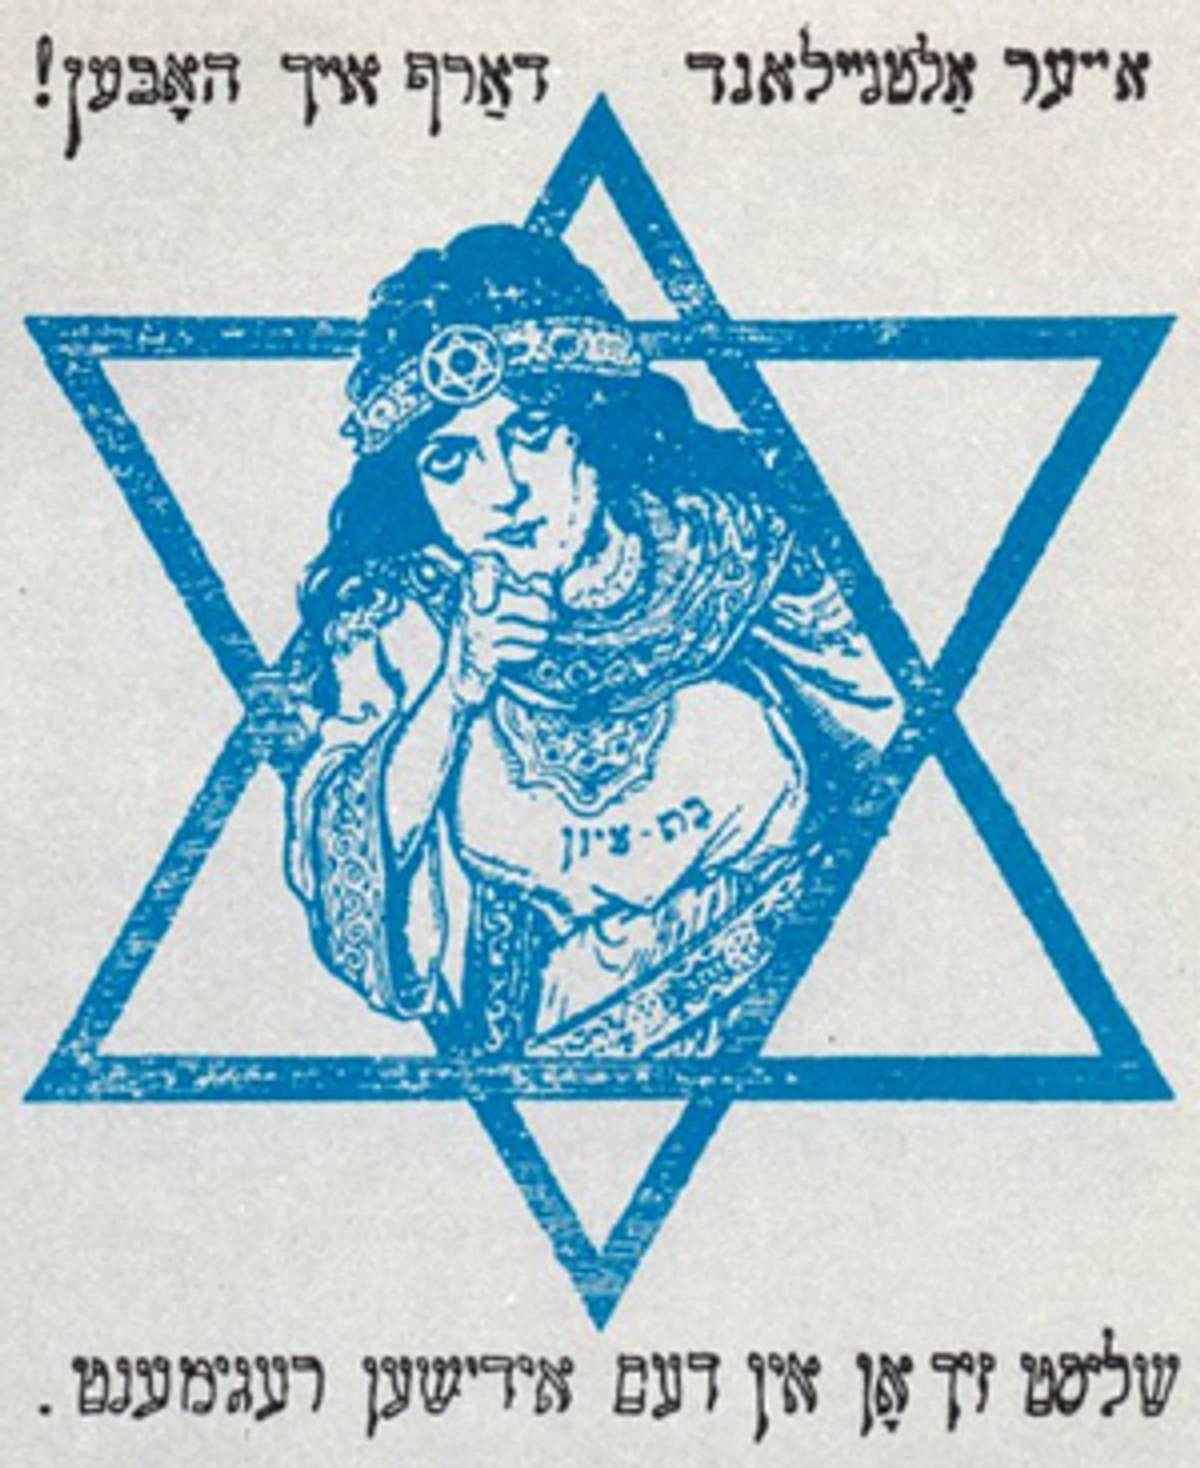 A recruitment poster for the Jewish Legion featuring the ”Daughter of Zion.“ The text reads, “Your Old New Land must have you! Join the Jewish regiment.”